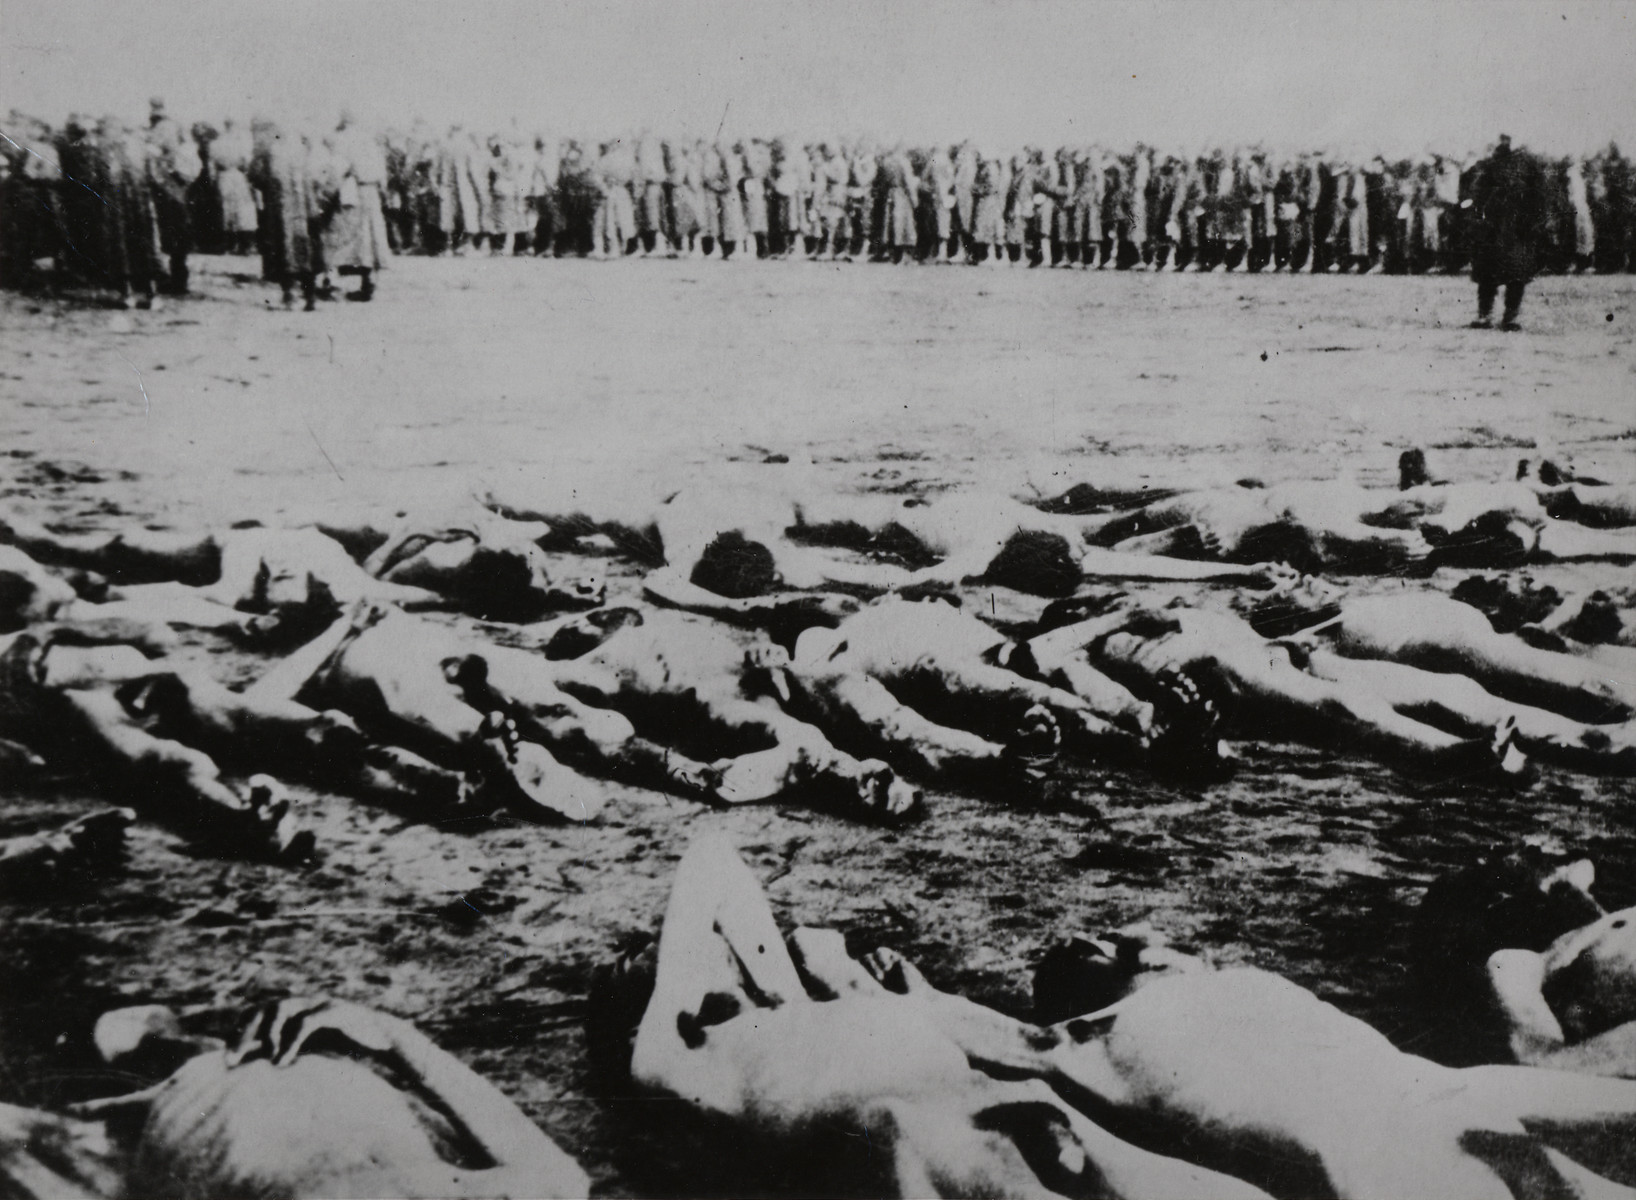 A column of Soviet POWs stands a short distance away from a large number of corpses laid out in rows in the open air.

The location shown in the image is disputed.  Herman Lewinter claims it is Janowska, while the State Archives of the Russian Federation claims it is Zloczew.  The other sources also claim the image shows a mass execution.